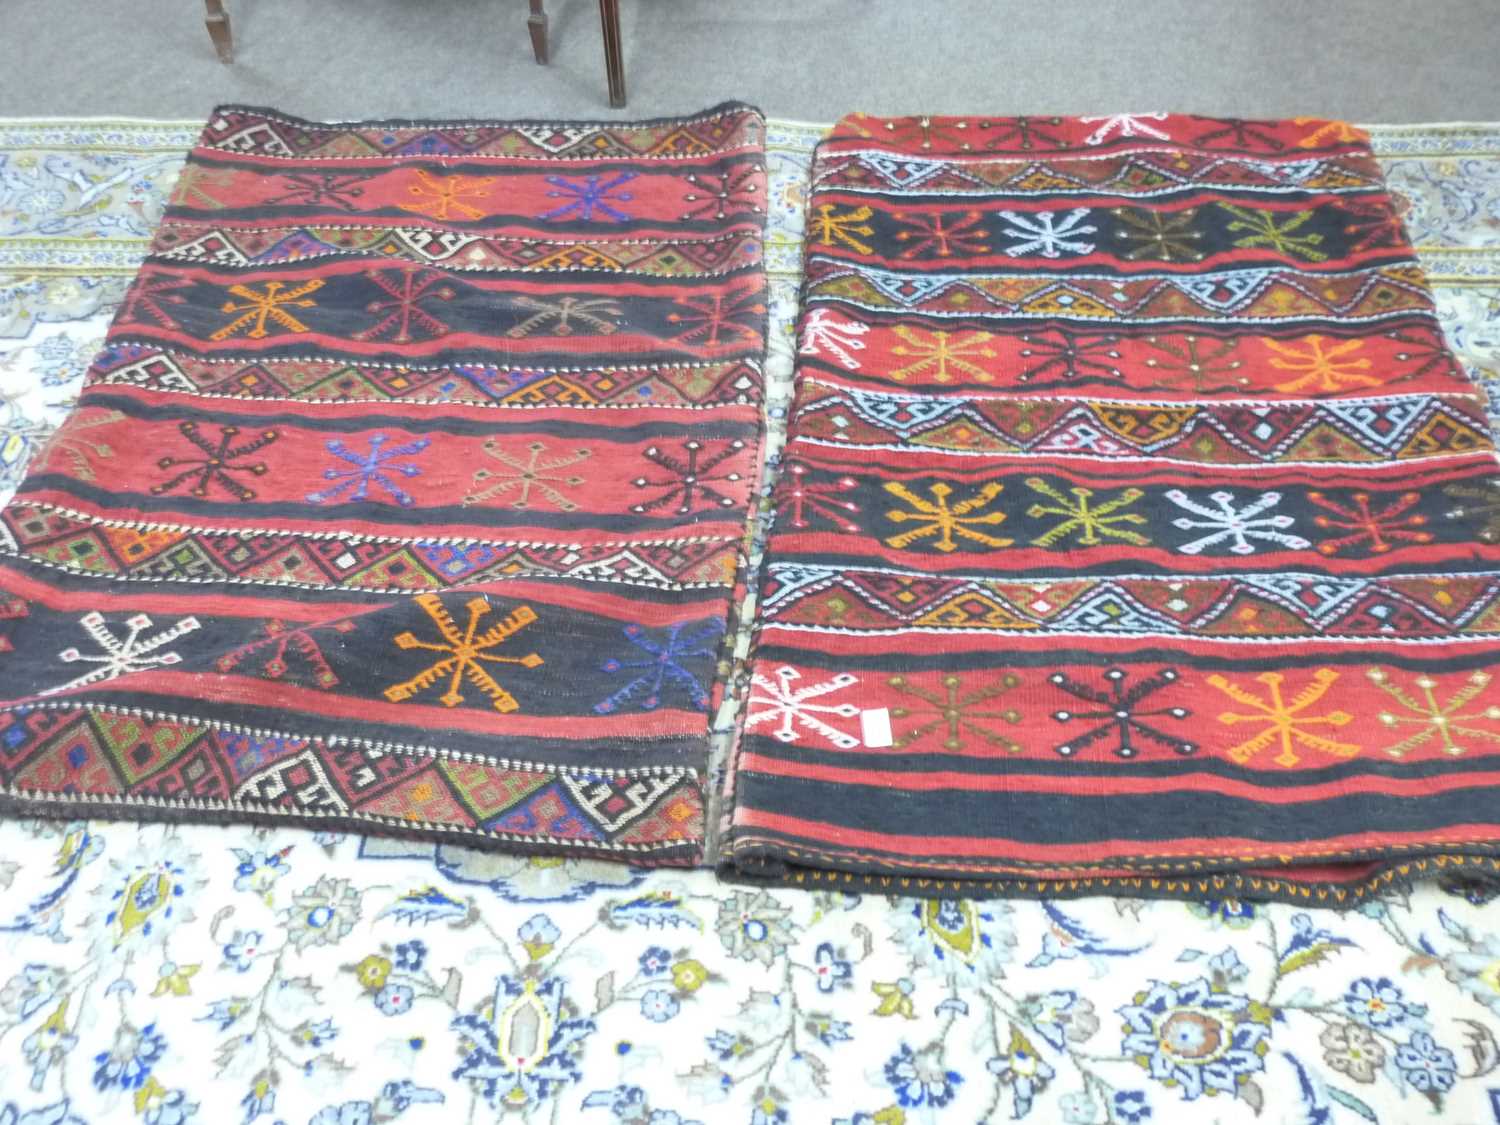 Two vintage carpet saddlebags, the largest 23 x 47 inches (2) - Image 2 of 2